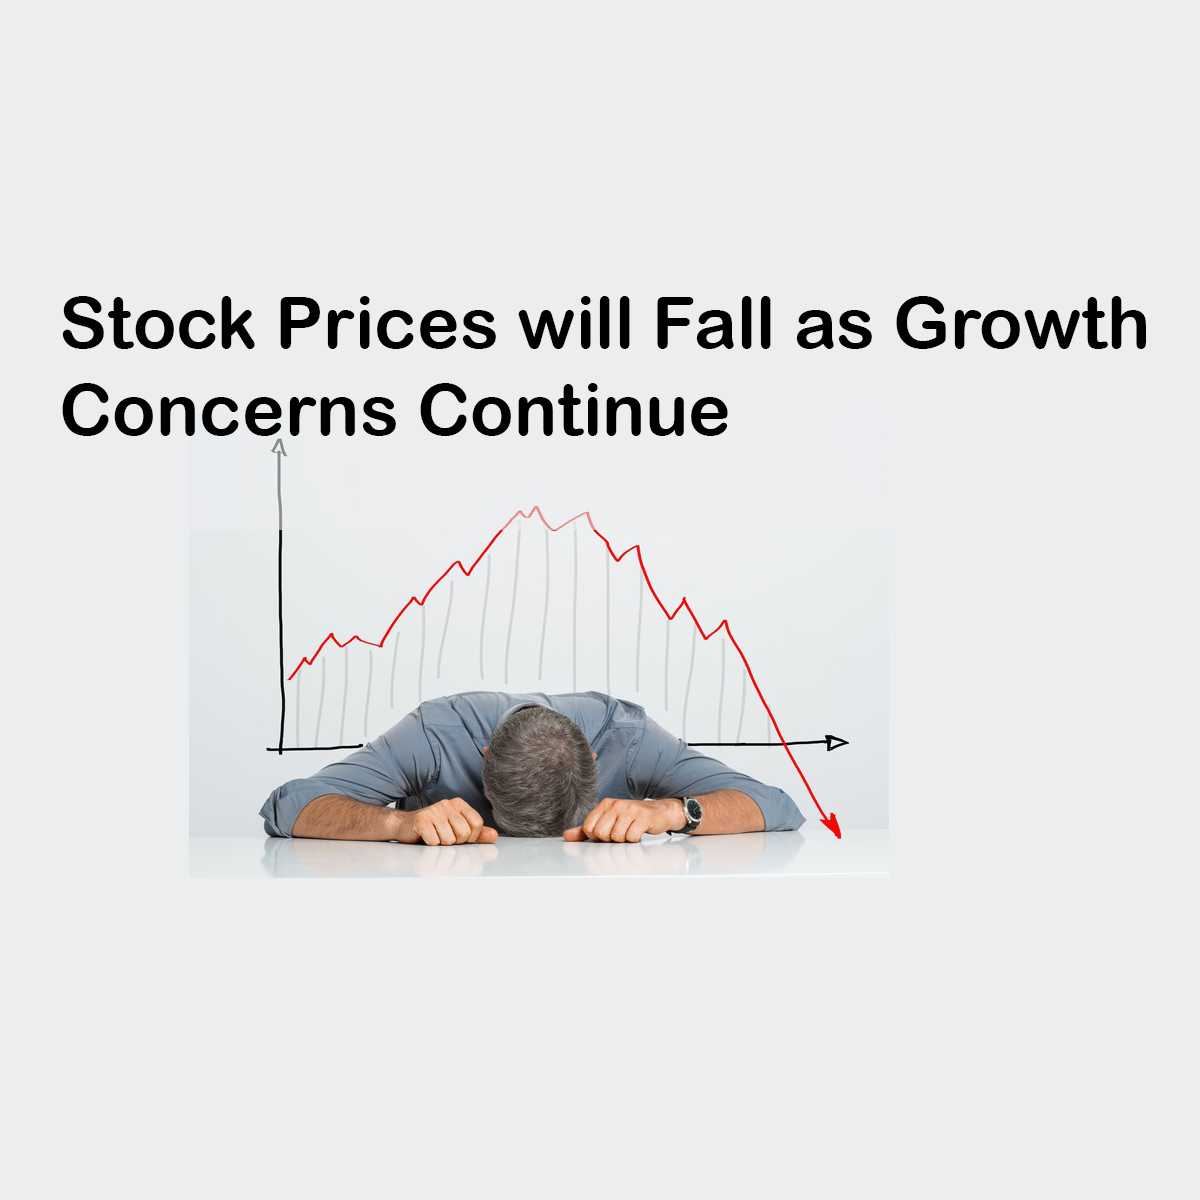 Stock Prices will Fall as Growth Concerns Continue